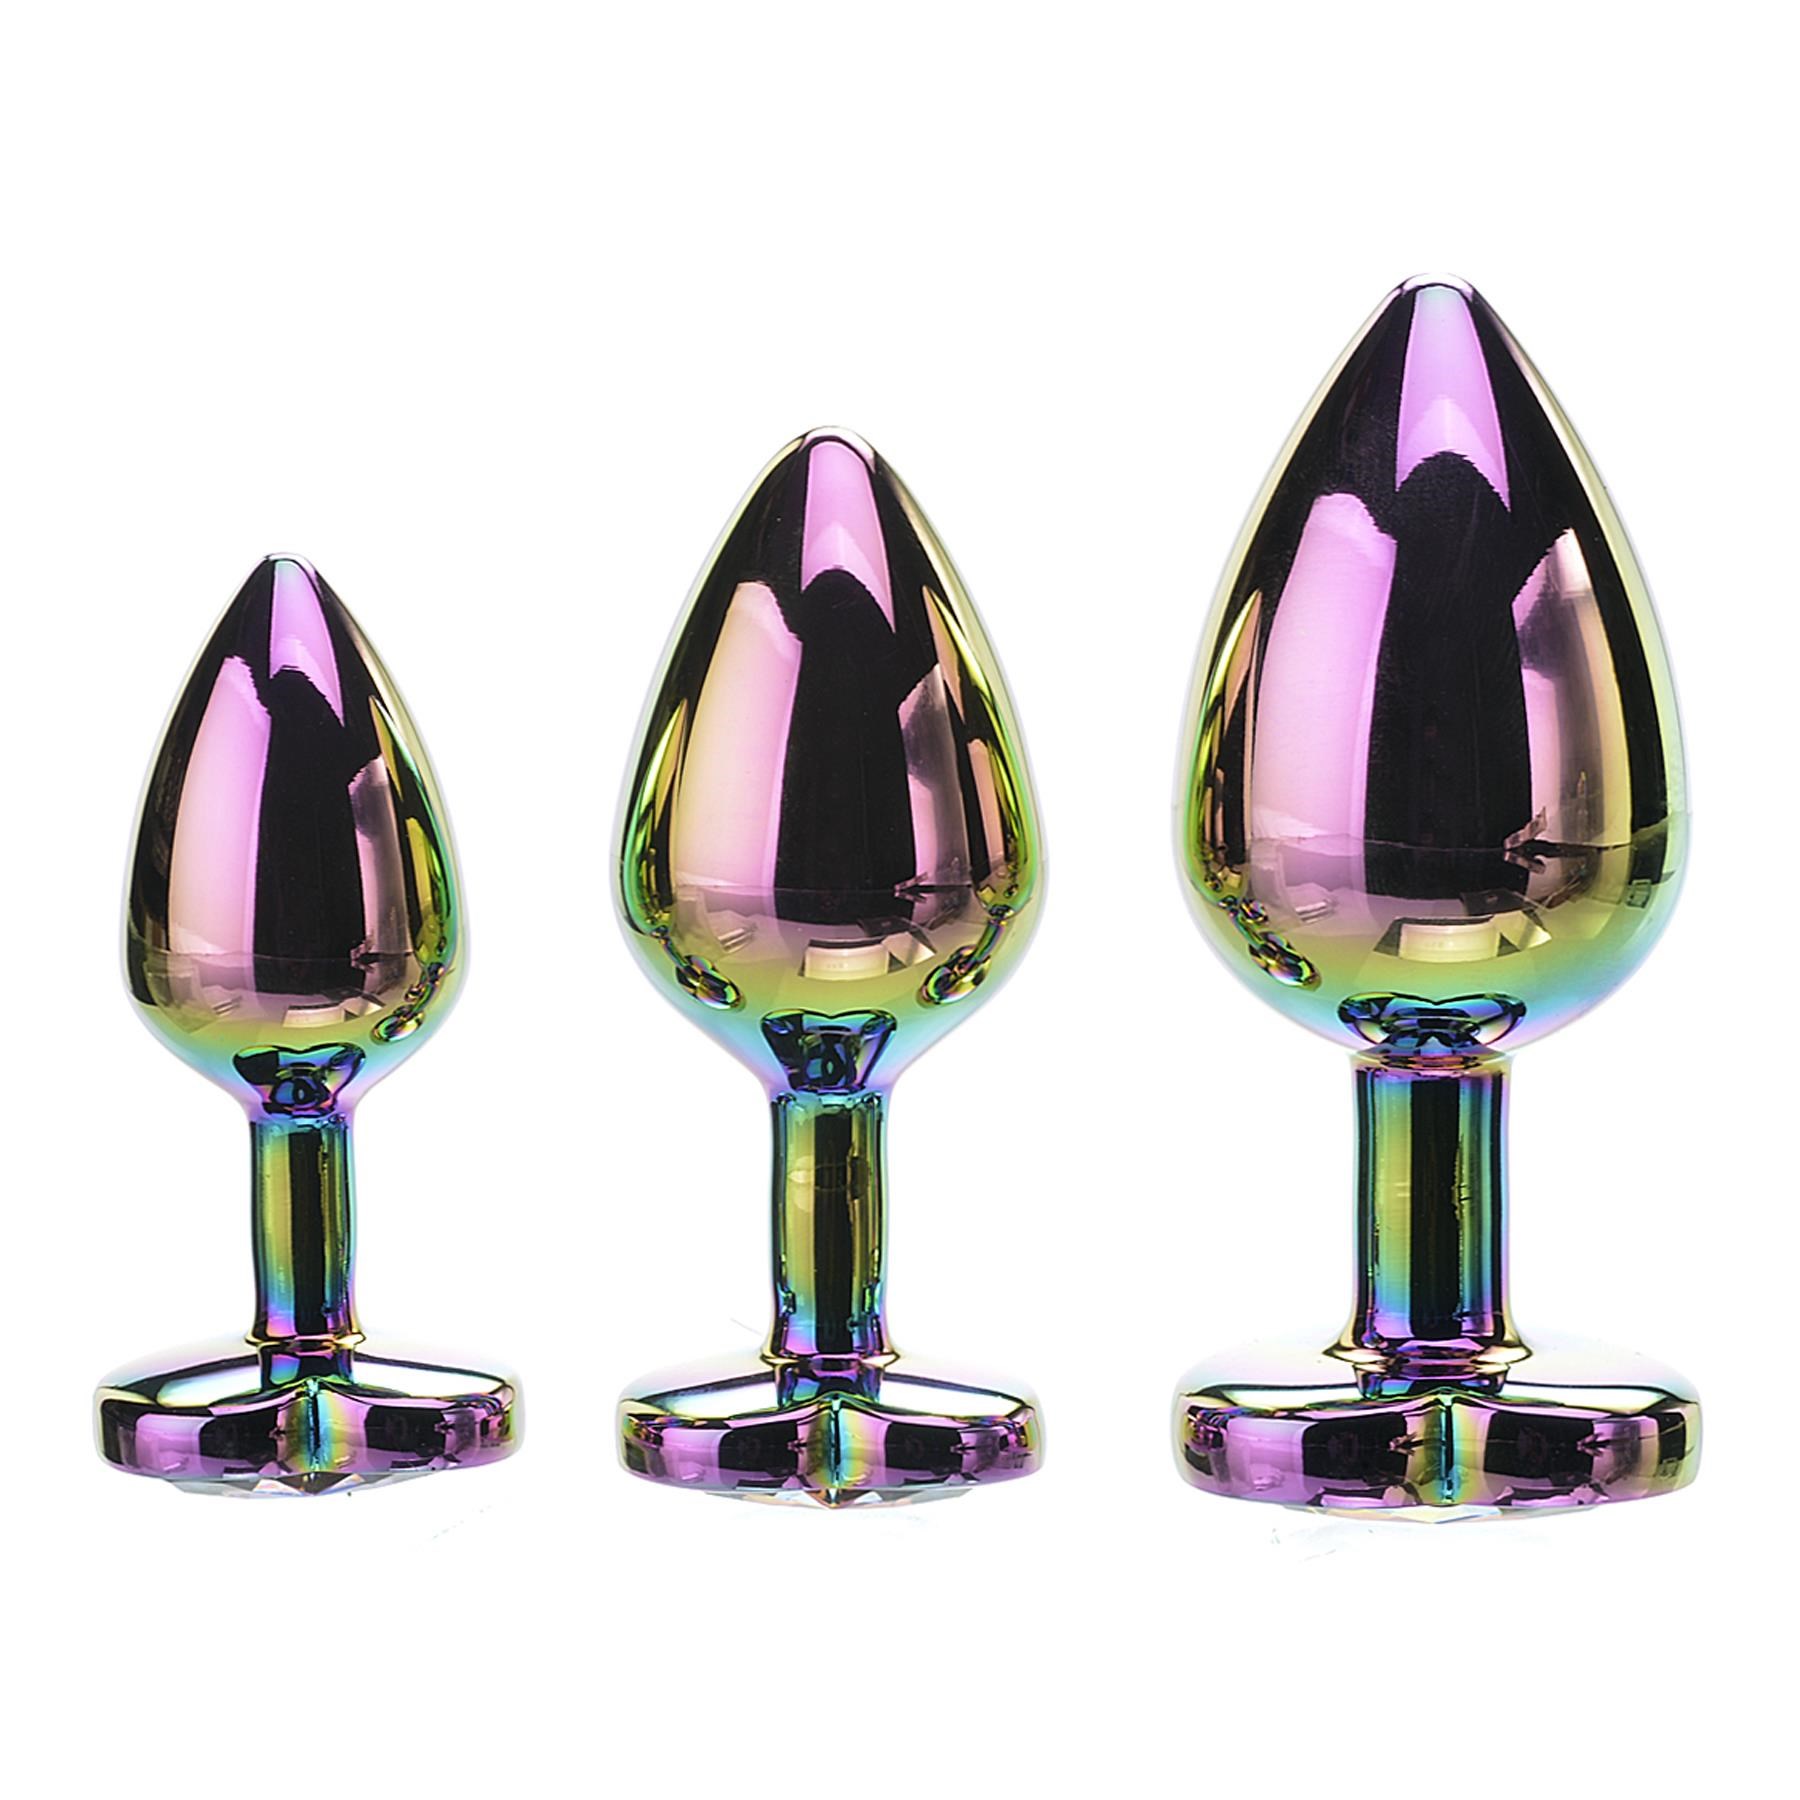 Rear Assets Rainbow Heart Anal Training Set - All Sizes